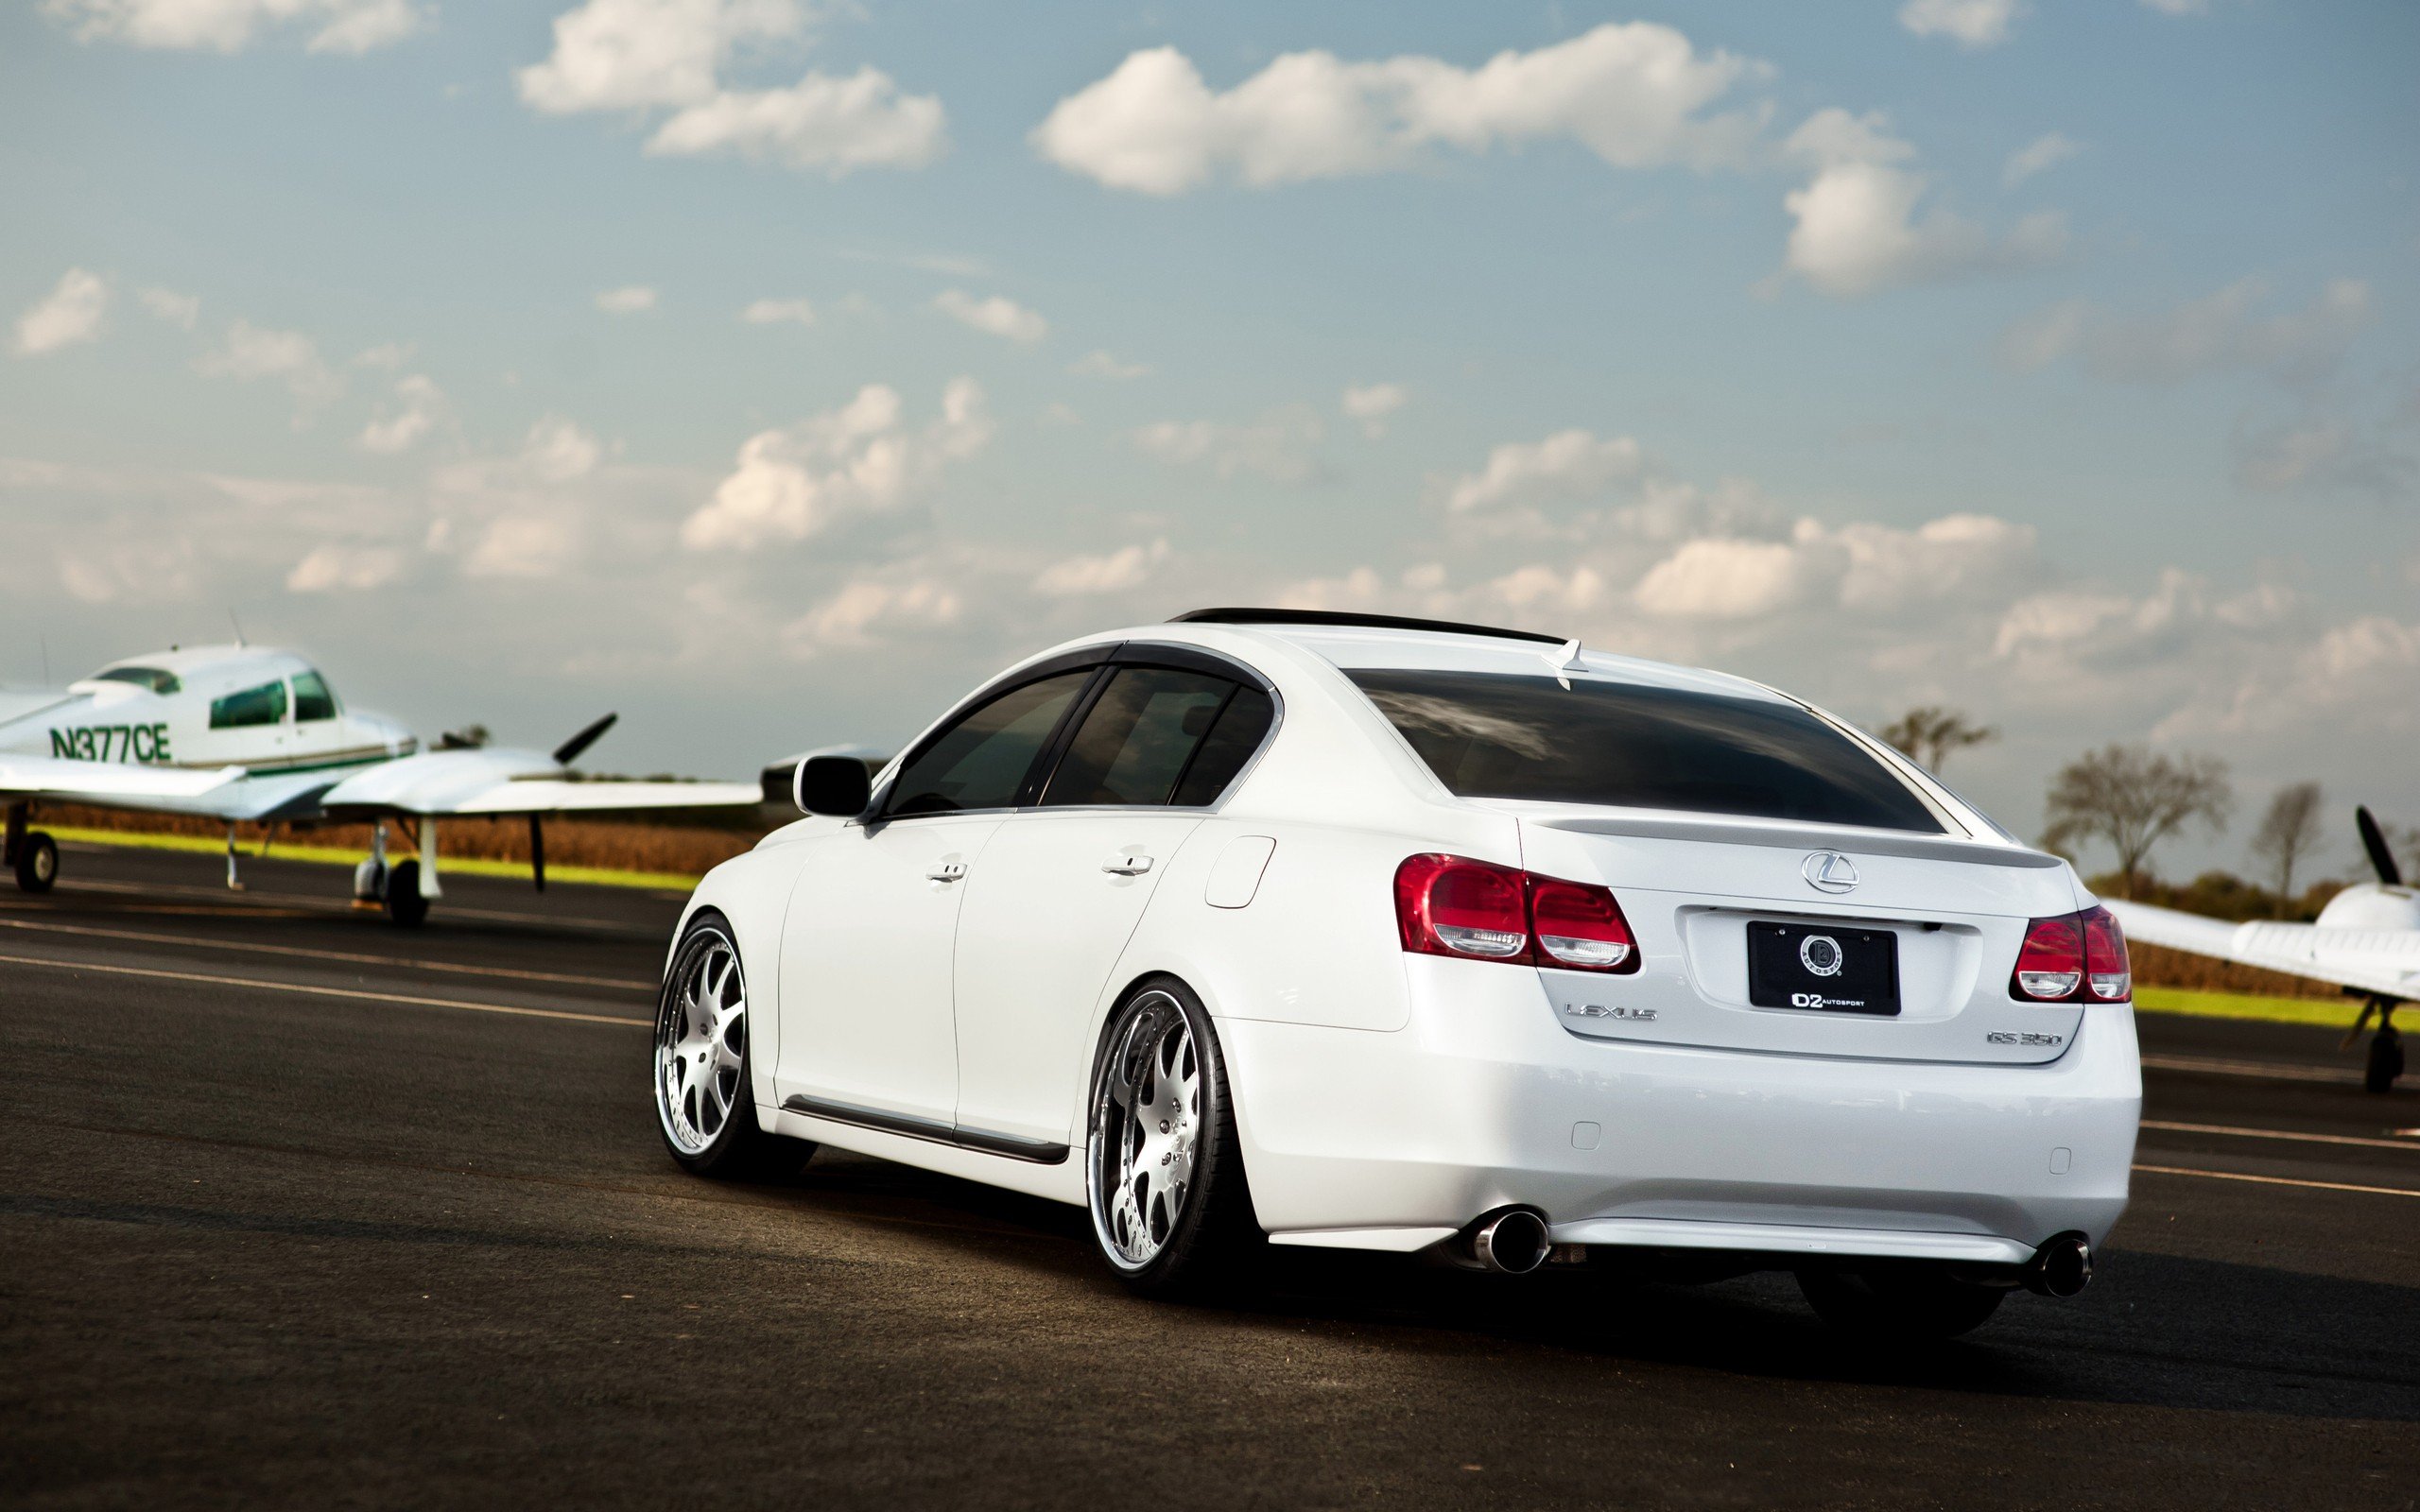 clouds, White, Back, Cars, Lexus, Runway, Planes, Vehicles, Supercars, Tuning, Wheels, Racing, Sports, Cars, Luxury, Sport, Cars, Speed, Automobiles Wallpaper